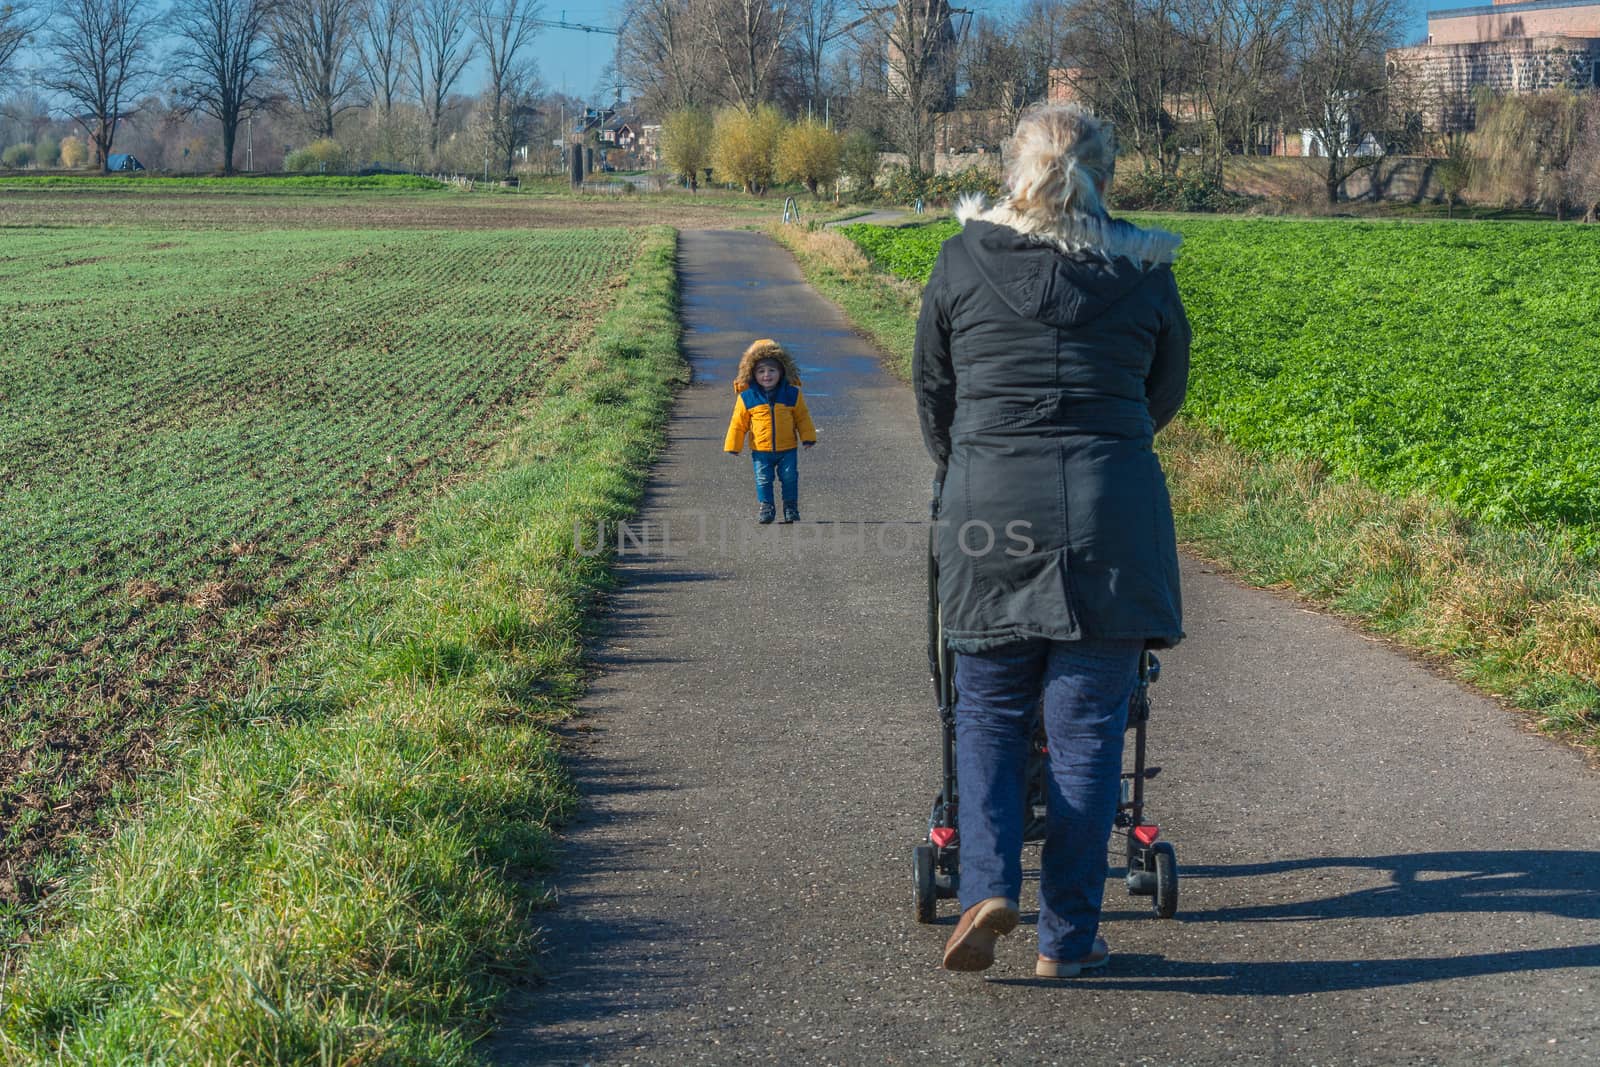  Grandmother and grandchild go for a walk by JFsPic